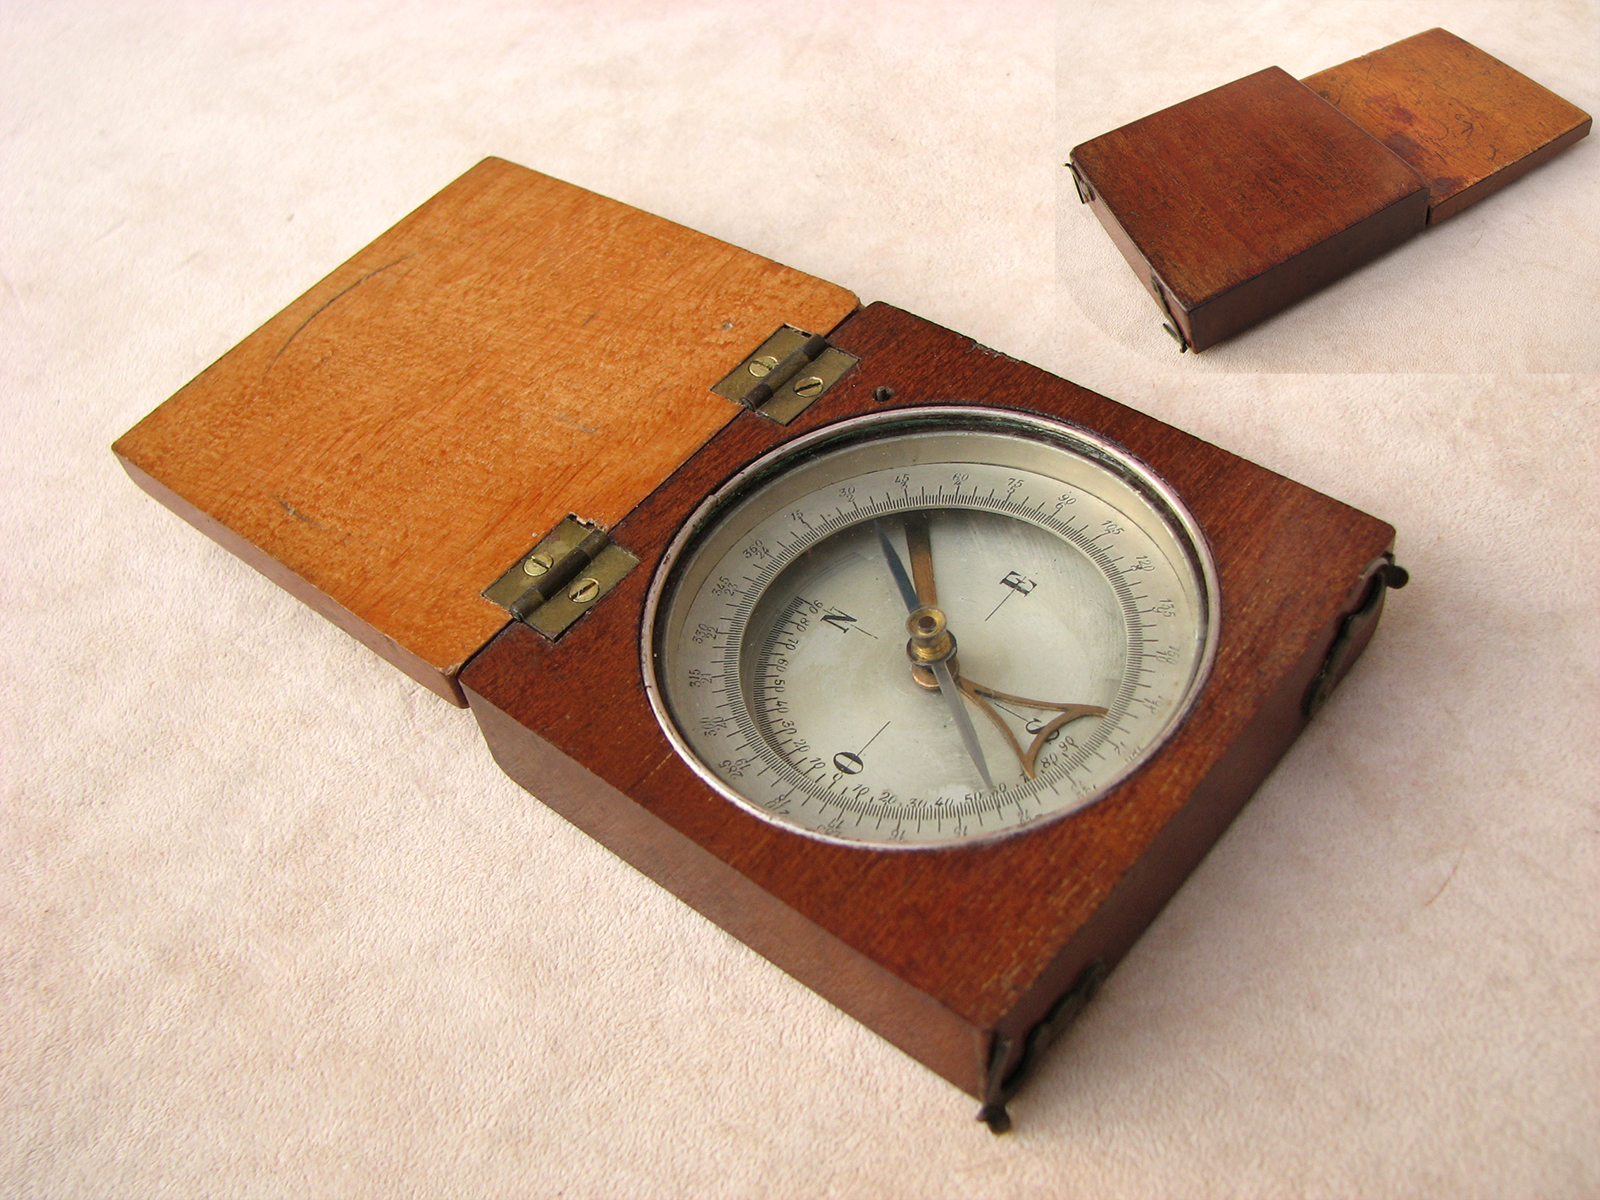 Mahogany cased compass with clinometer arm